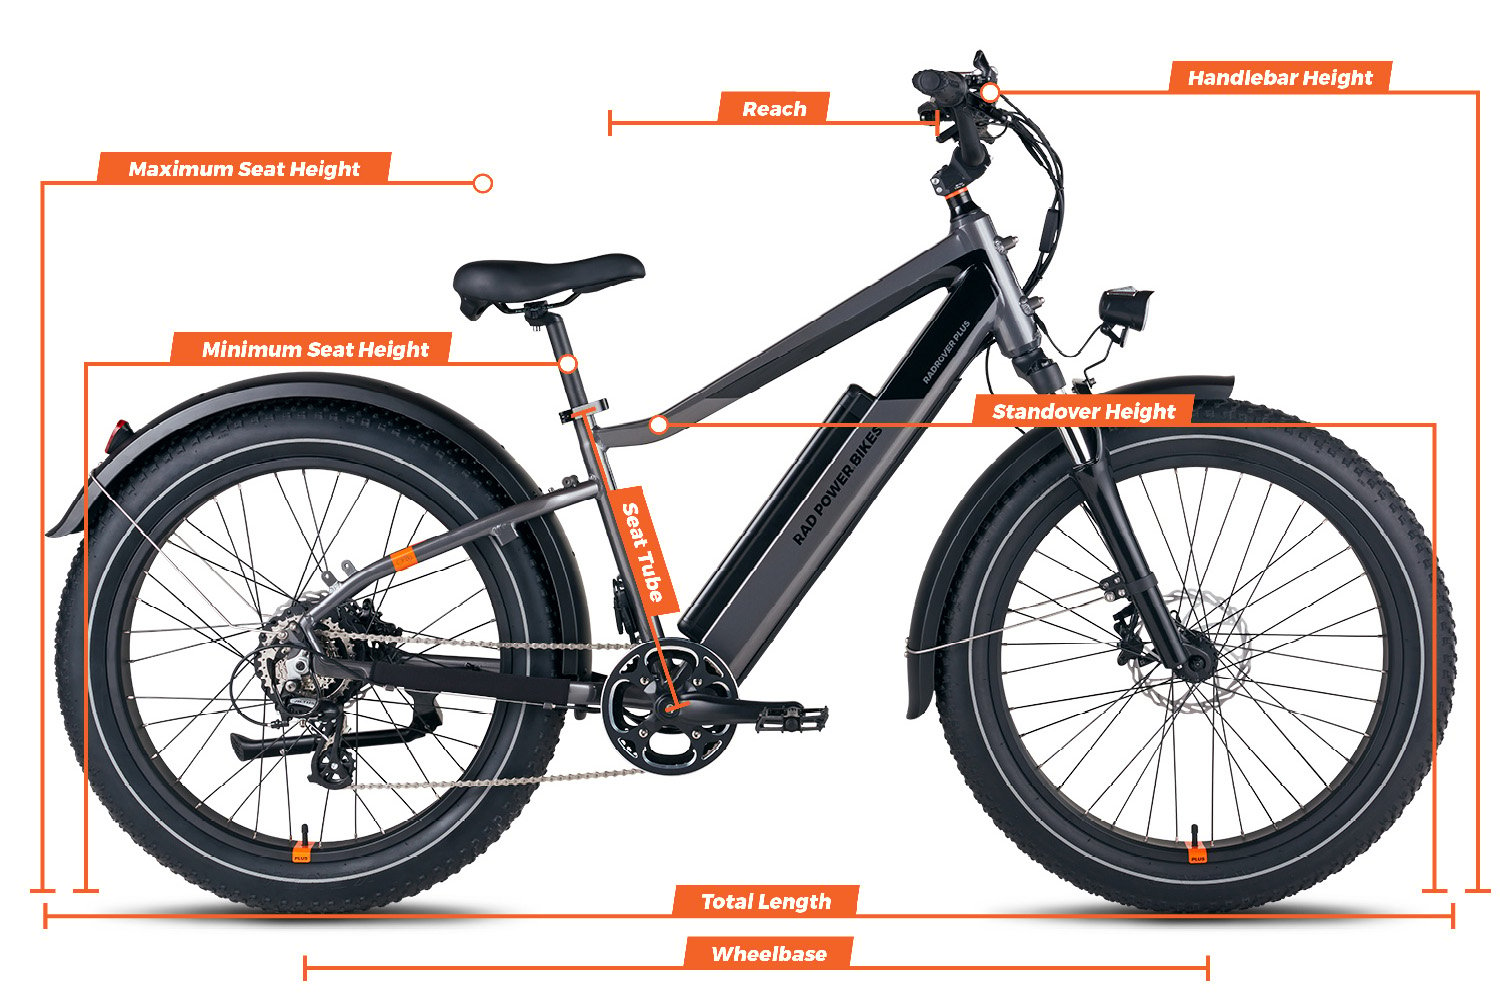 Geometry chart for the RadRover 6 Plus High-Step Electric Fat Tire Bike